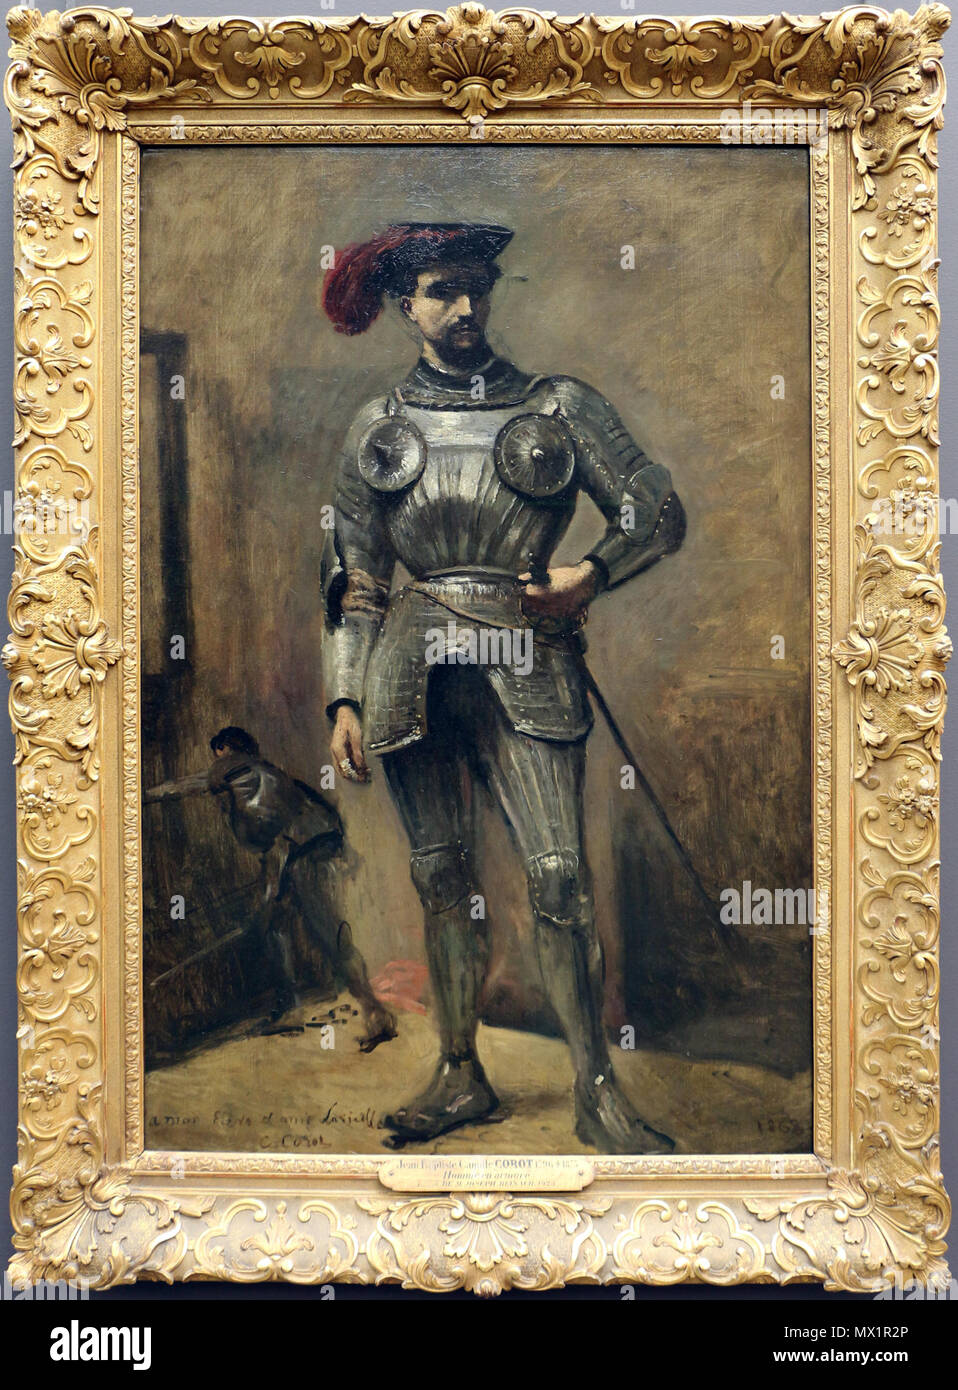 . the man in armor .  English: Paintings by Jean-Baptiste-Camille Corot in the Louvre . 1868 ; 2016-06-16 17:21:40. Sailko 109 Camille corot, l'uomo in armatura detto anche il cavaliere, 1868 Stock Photo